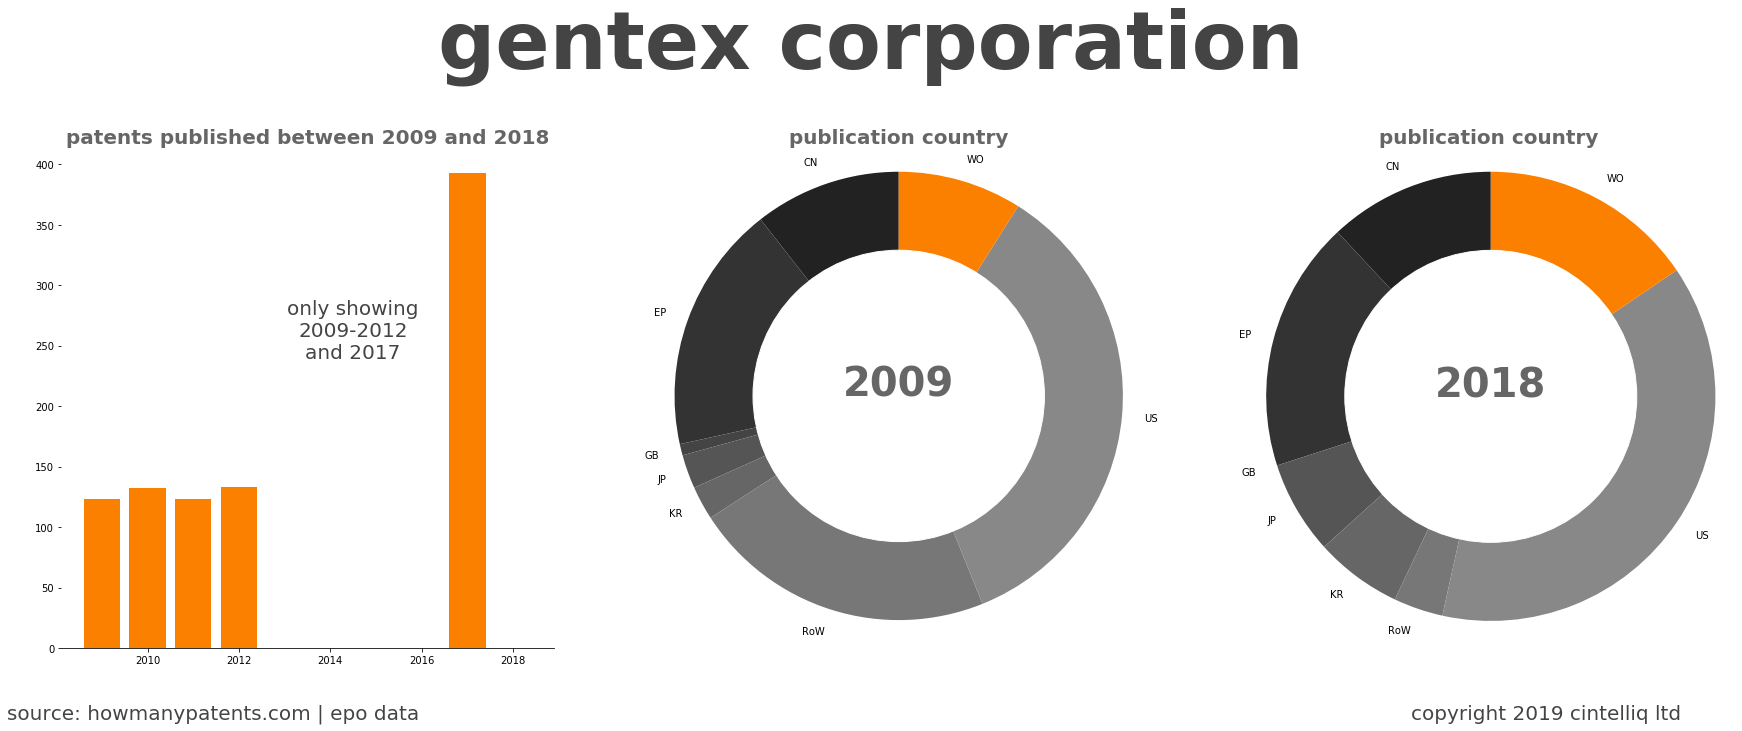 summary of patents for Gentex Corporation